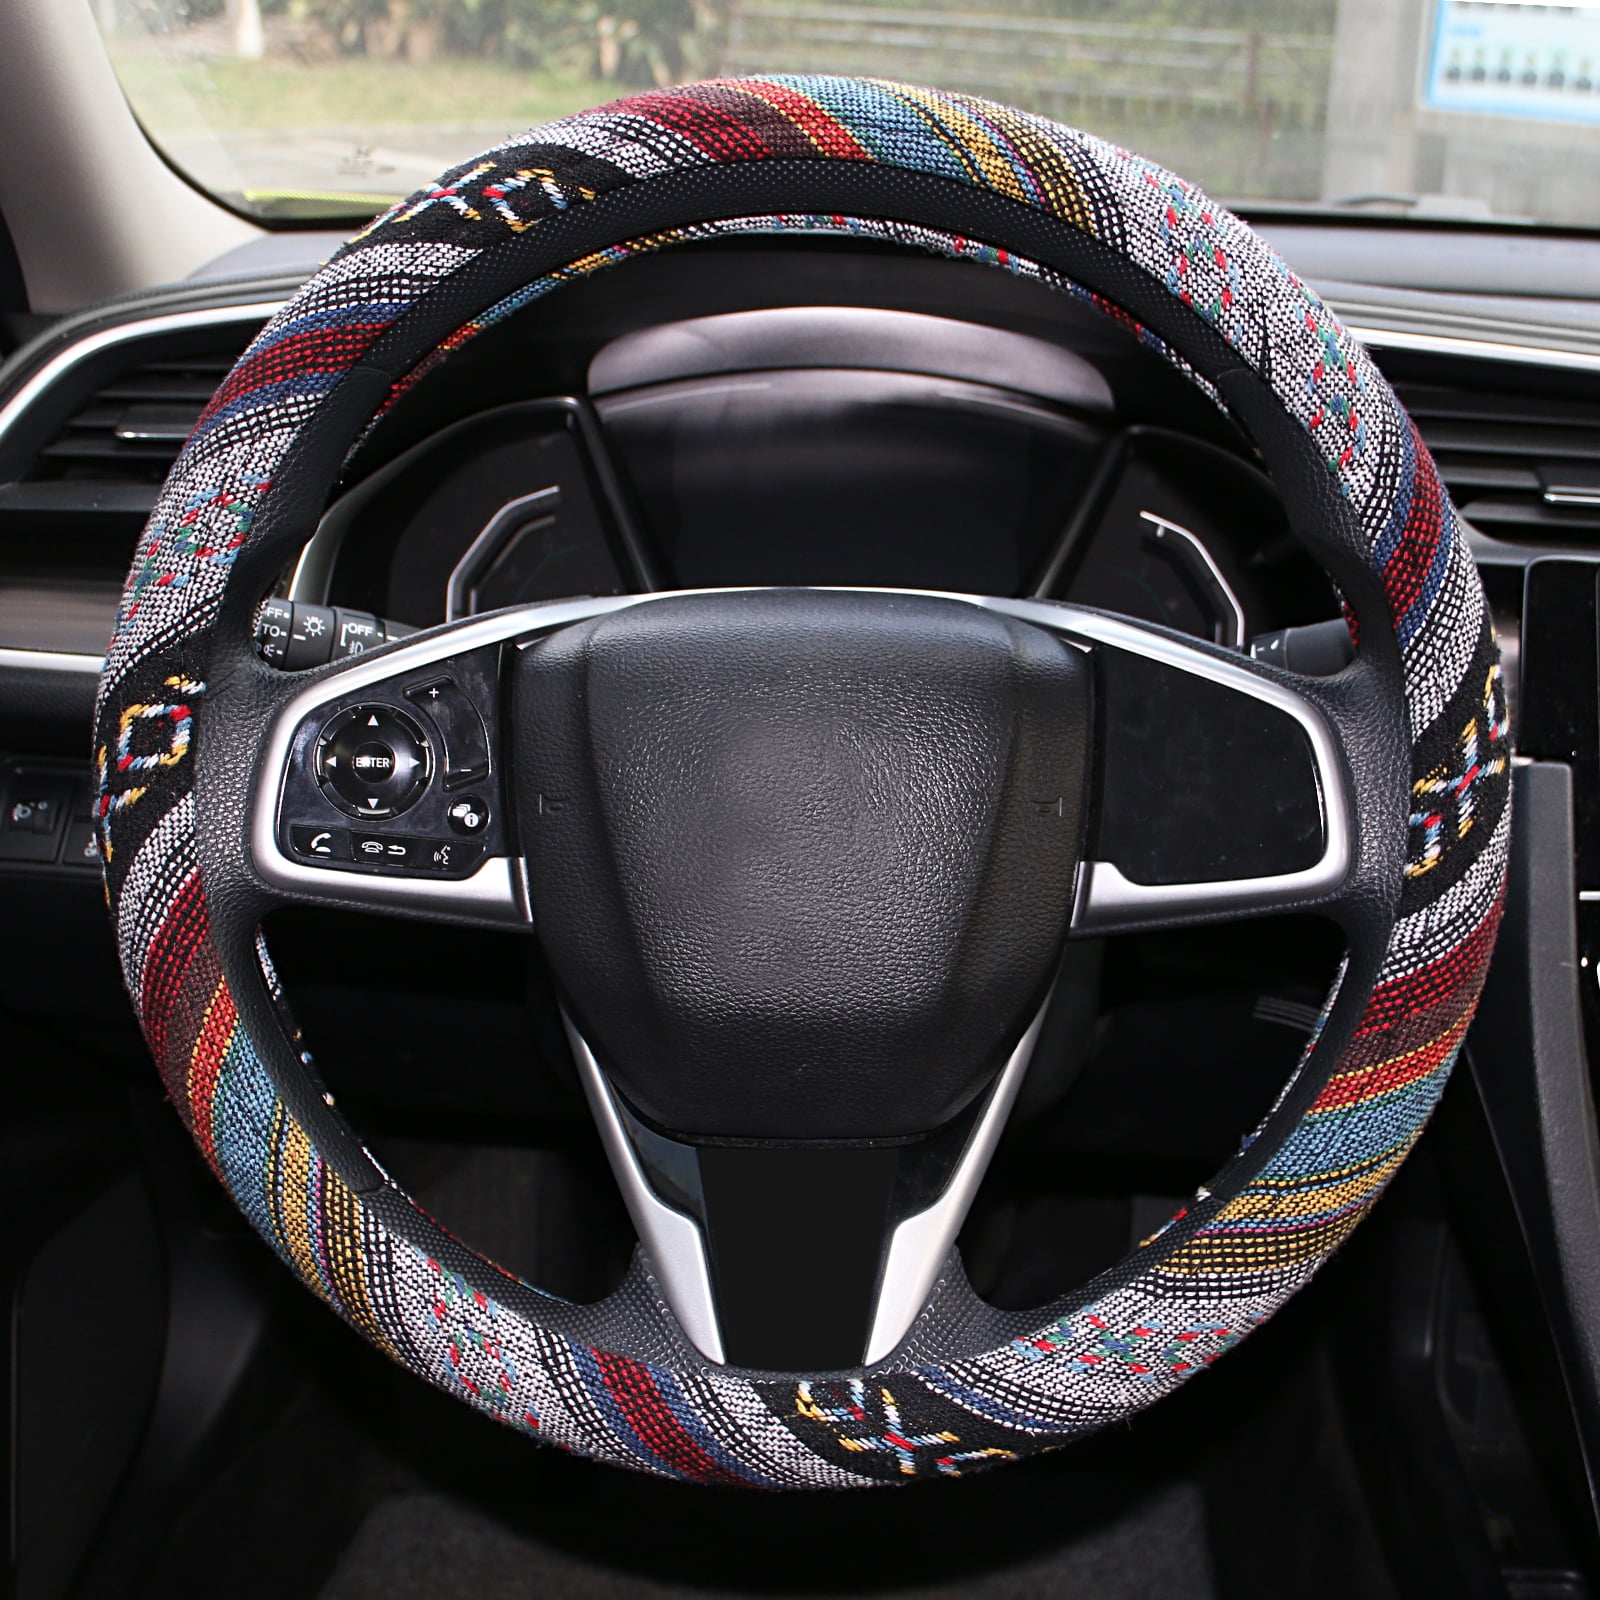 Baja Blanket Steering Wheel Cover Colorful Inca Fabric Pattern Cover for Steering Wheel Sizes 14.5 15 15.5 Inches 